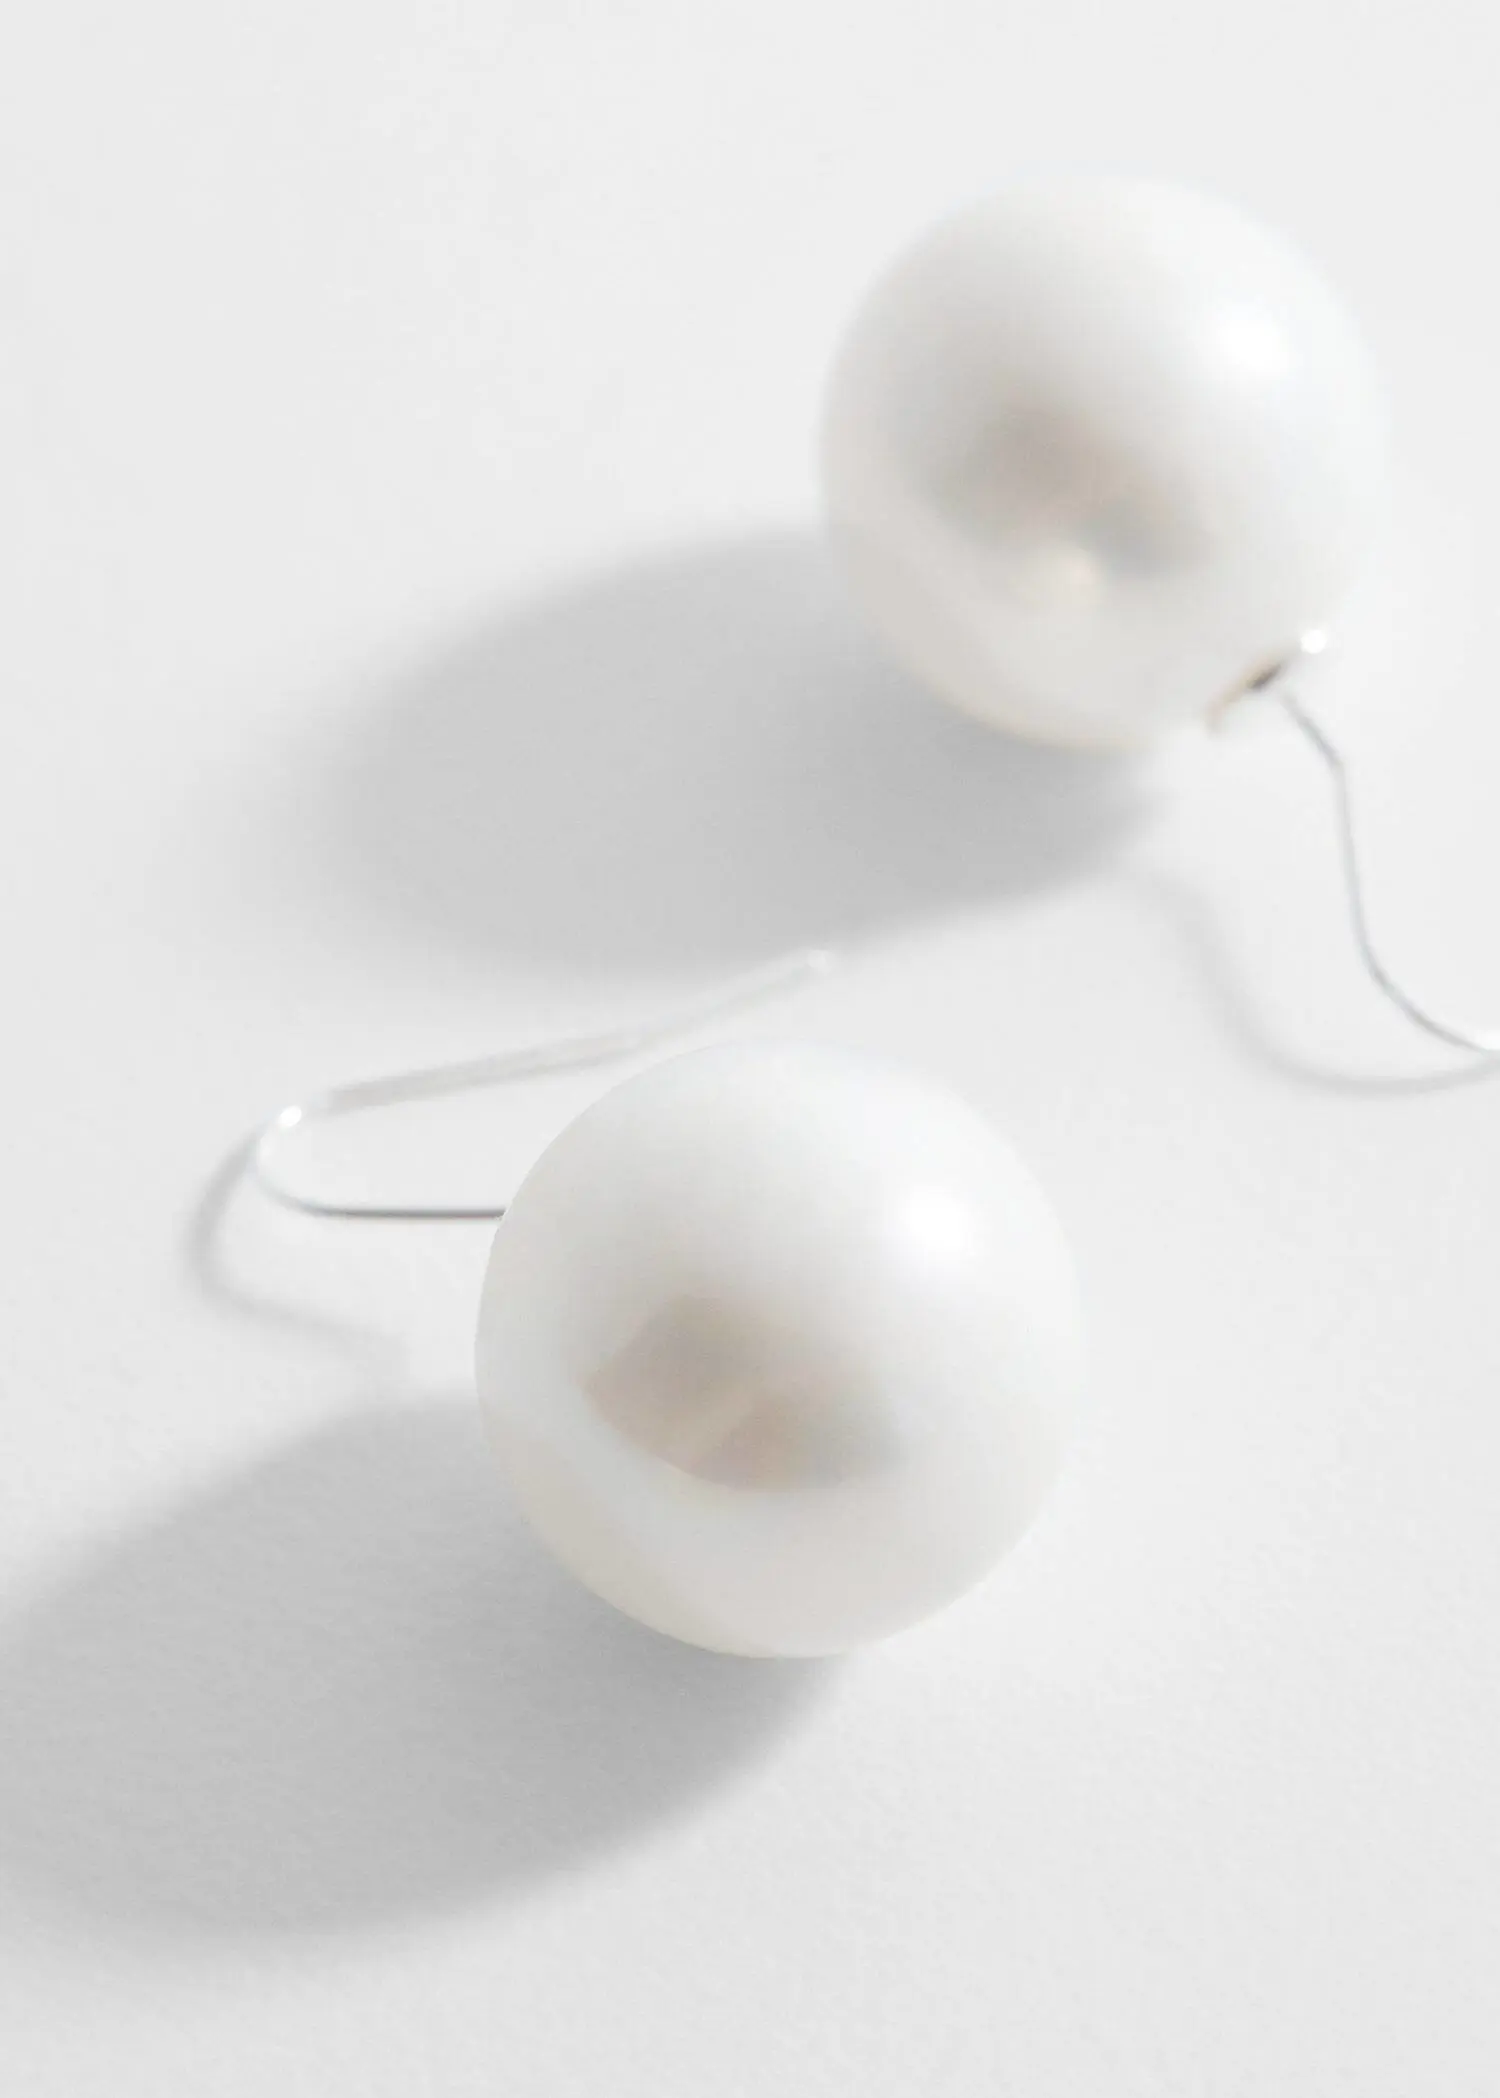 Mango Pearl crystal earrings. a pair of white balls sitting on top of a table. 